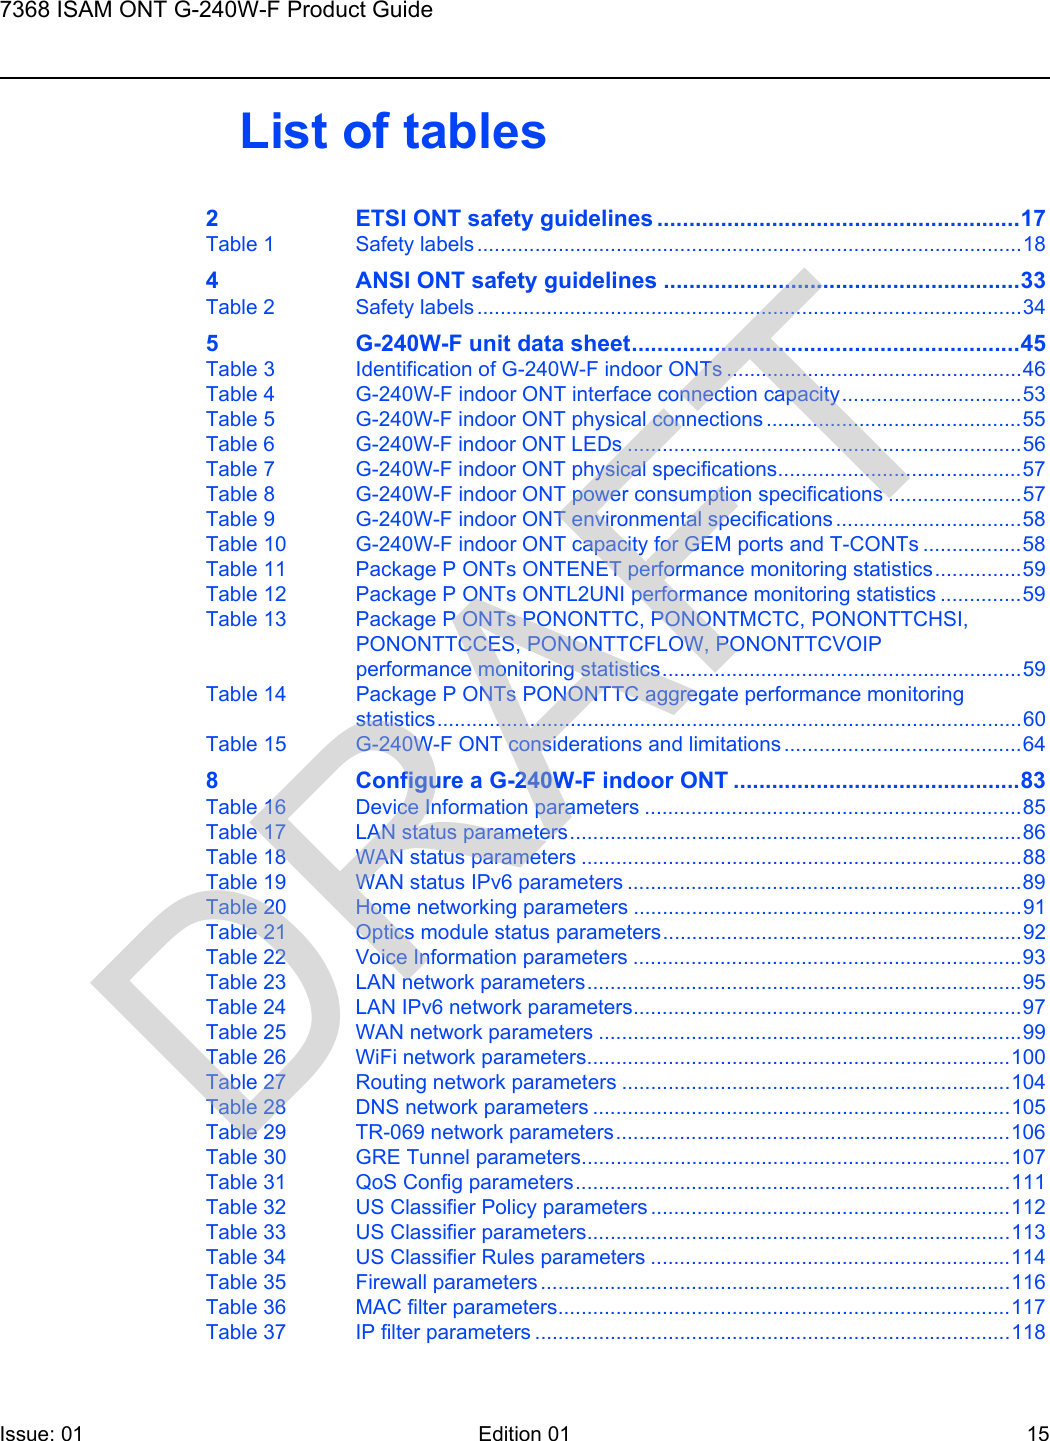 7368 ISAM ONT G-240W-F Product GuideIssue: 01 Edition 01 15 List of tables2 ETSI ONT safety guidelines .........................................................17Table 1 Safety labels ..............................................................................................184 ANSI ONT safety guidelines ........................................................33Table 2 Safety labels ..............................................................................................345 G-240W-F unit data sheet.............................................................45Table 3 Identification of G-240W-F indoor ONTs ...................................................46Table 4 G-240W-F indoor ONT interface connection capacity...............................53Table 5 G-240W-F indoor ONT physical connections ............................................55Table 6 G-240W-F indoor ONT LEDs ....................................................................56Table 7 G-240W-F indoor ONT physical specifications..........................................57Table 8 G-240W-F indoor ONT power consumption specifications .......................57Table 9 G-240W-F indoor ONT environmental specifications ................................58Table 10 G-240W-F indoor ONT capacity for GEM ports and T-CONTs .................58Table 11 Package P ONTs ONTENET performance monitoring statistics...............59Table 12 Package P ONTs ONTL2UNI performance monitoring statistics ..............59Table 13 Package P ONTs PONONTTC, PONONTMCTC, PONONTTCHSI, PONONTTCCES, PONONTTCFLOW, PONONTTCVOIP performance monitoring statistics..............................................................59Table 14 Package P ONTs PONONTTC aggregate performance monitoring statistics.....................................................................................................60Table 15 G-240W-F ONT considerations and limitations .........................................648 Configure a G-240W-F indoor ONT .............................................83Table 16 Device Information parameters .................................................................85Table 17 LAN status parameters..............................................................................86Table 18 WAN status parameters ............................................................................88Table 19 WAN status IPv6 parameters ....................................................................89Table 20 Home networking parameters ...................................................................91Table 21 Optics module status parameters..............................................................92Table 22 Voice Information parameters ...................................................................93Table 23 LAN network parameters...........................................................................95Table 24 LAN IPv6 network parameters...................................................................97Table 25 WAN network parameters .........................................................................99Table 26 WiFi network parameters.........................................................................100Table 27 Routing network parameters ...................................................................104Table 28 DNS network parameters ........................................................................105Table 29 TR-069 network parameters....................................................................106Table 30 GRE Tunnel parameters..........................................................................107Table 31 QoS Config parameters...........................................................................111Table 32 US Classifier Policy parameters ..............................................................112Table 33 US Classifier parameters.........................................................................113Table 34 US Classifier Rules parameters ..............................................................114Table 35 Firewall parameters .................................................................................116Table 36 MAC filter parameters..............................................................................117Table 37 IP filter parameters ..................................................................................118DRAFT